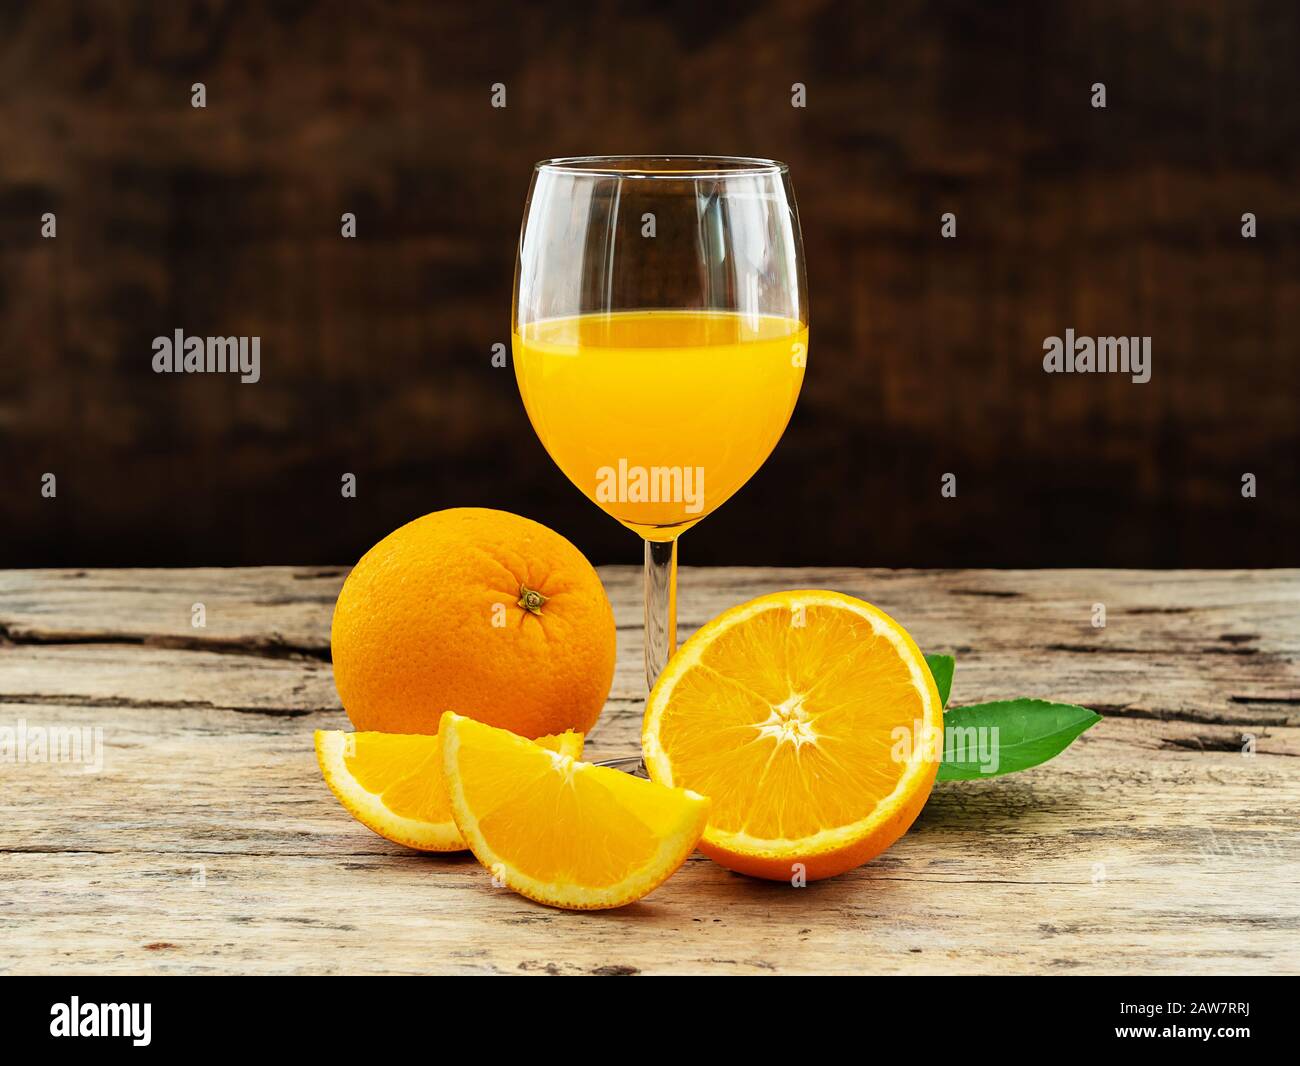 a glass of fresh orange juice and group of fresh orange fruits with green leaves, on wooden background. fruit product display or montage, studio shot Stock Photo